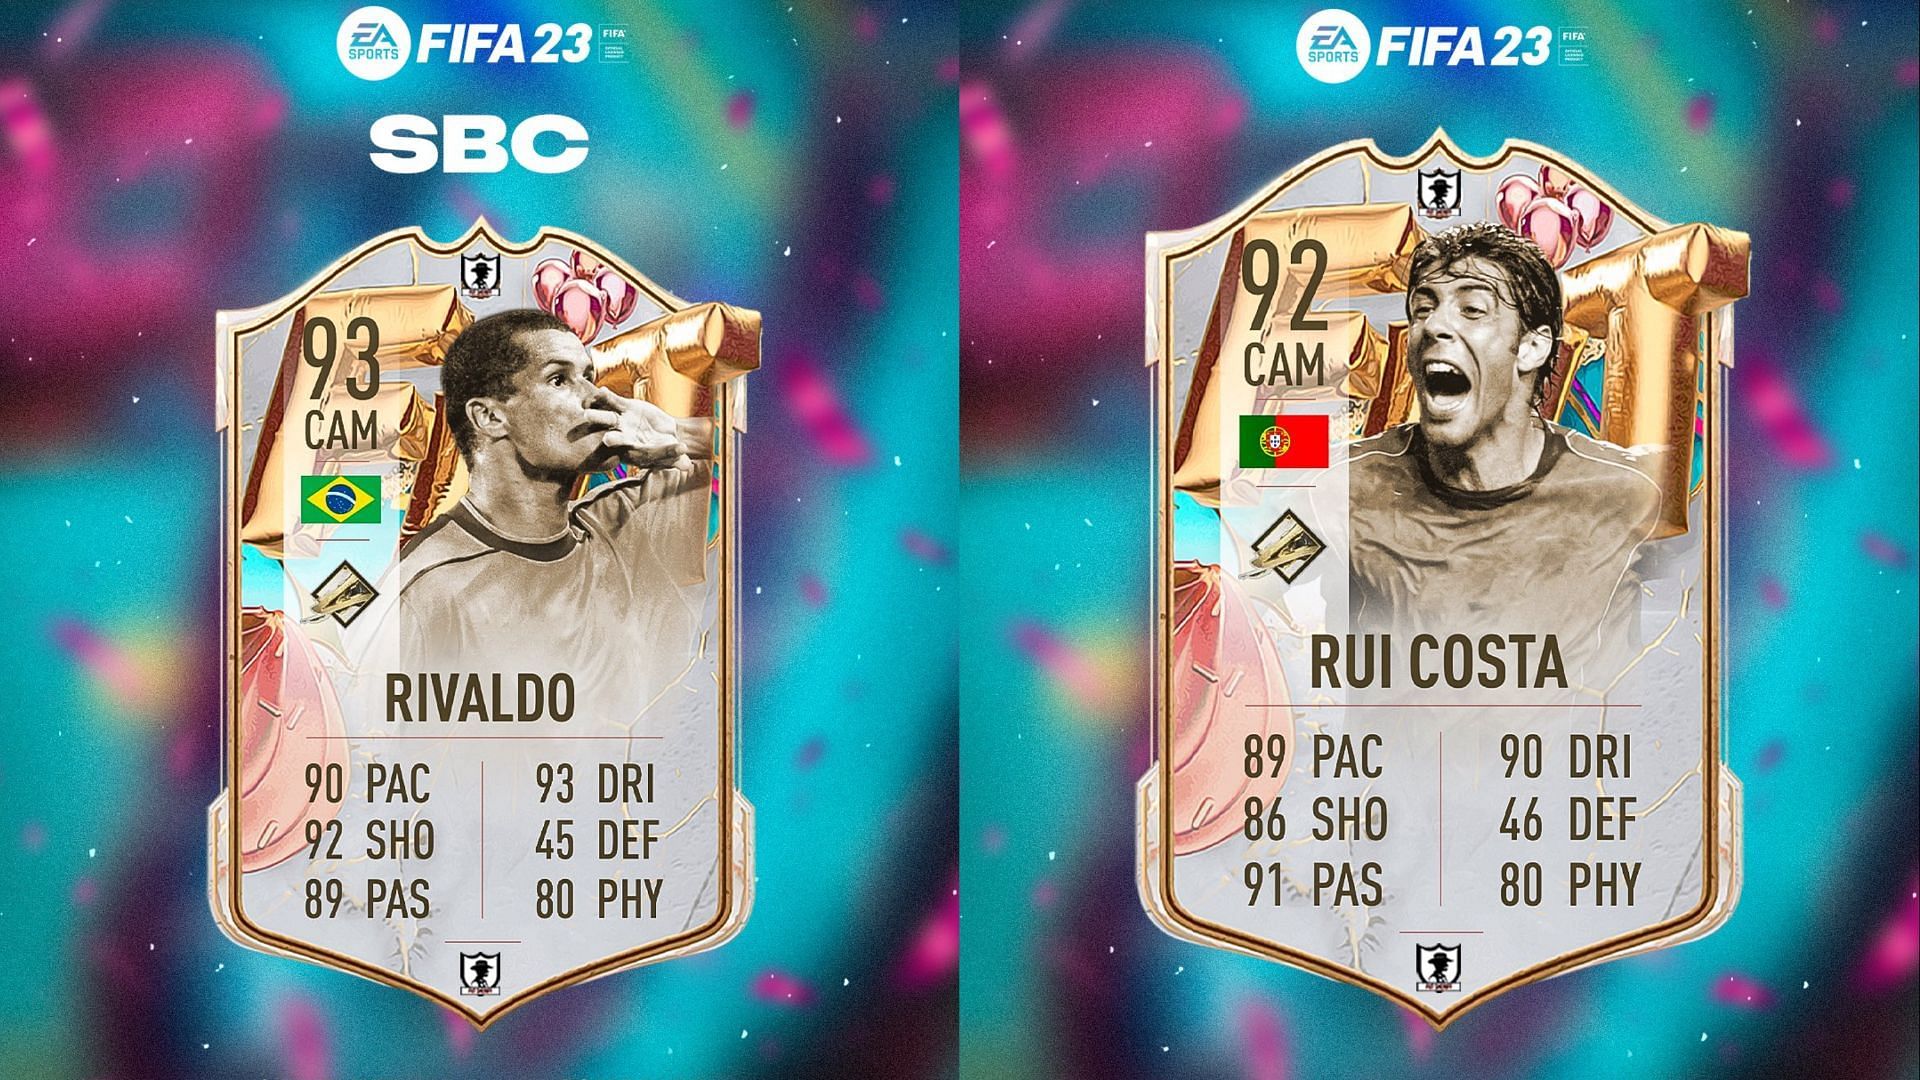 Rivaldo and Rui Costa&rsquo;s FUT Birthday Icon cards could be valuable assets for FIFA 23 players (Images via Twitter/FUT Sheriff)